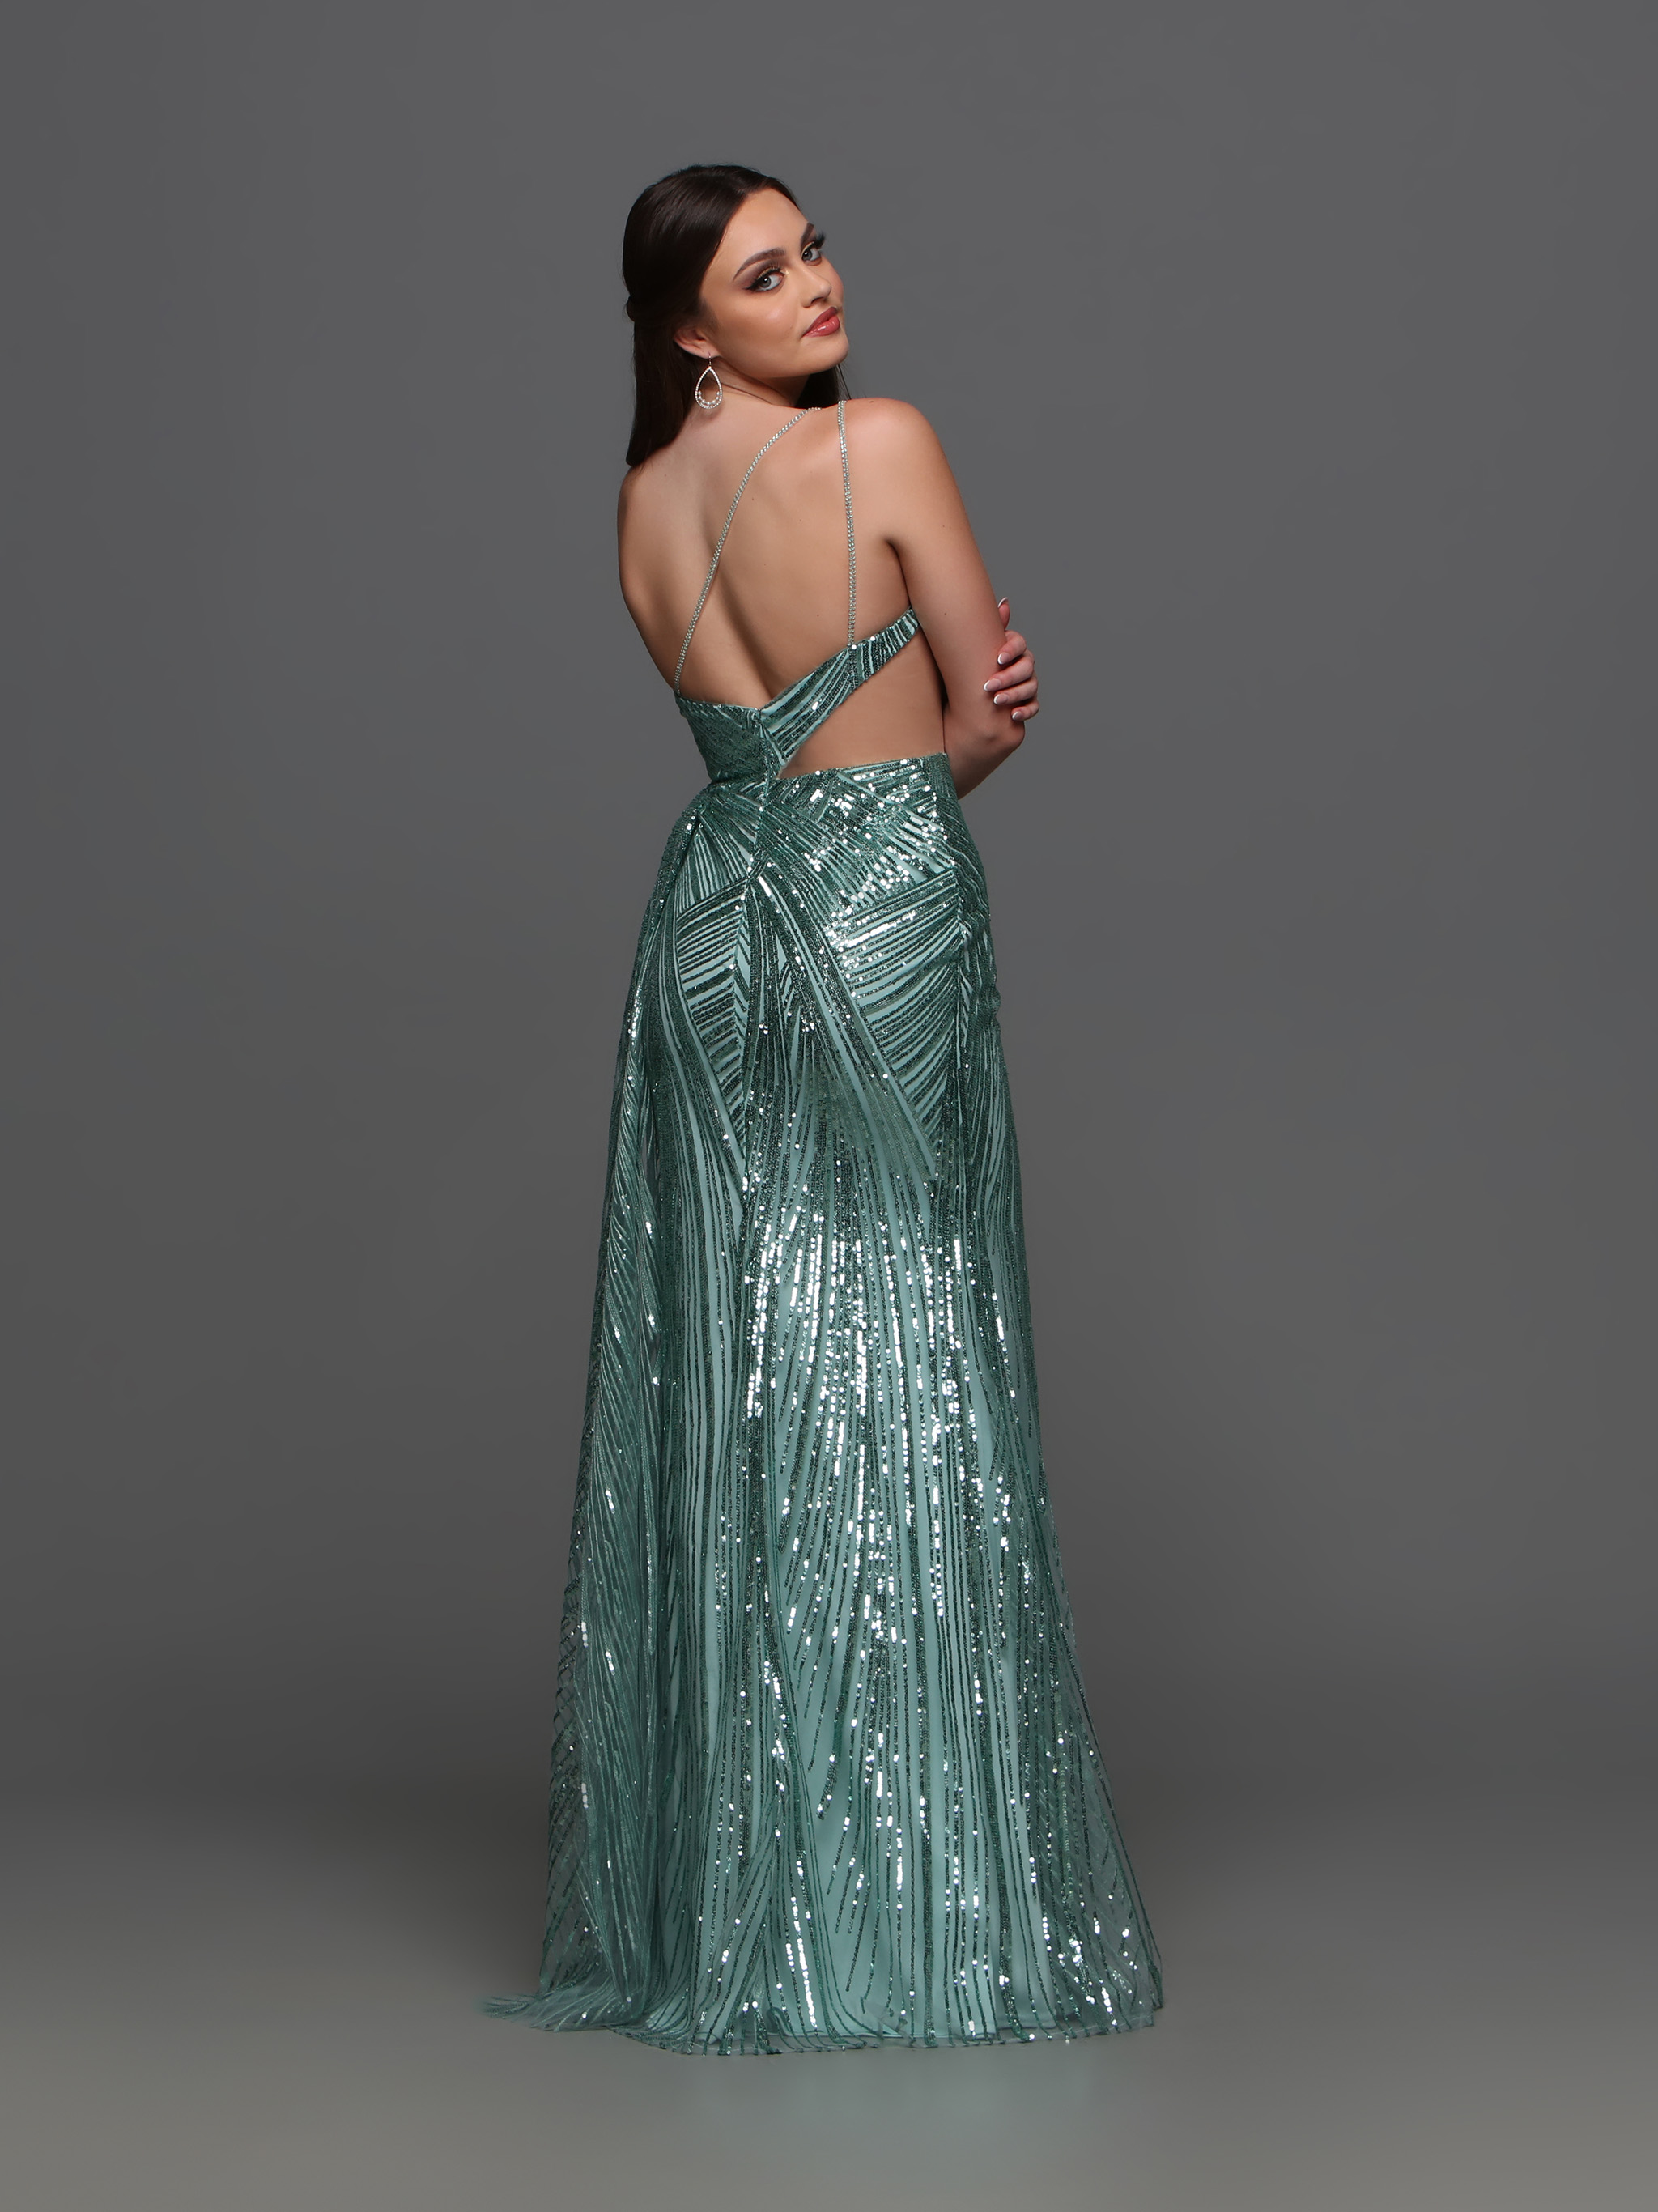 Image showing back view of style #72323